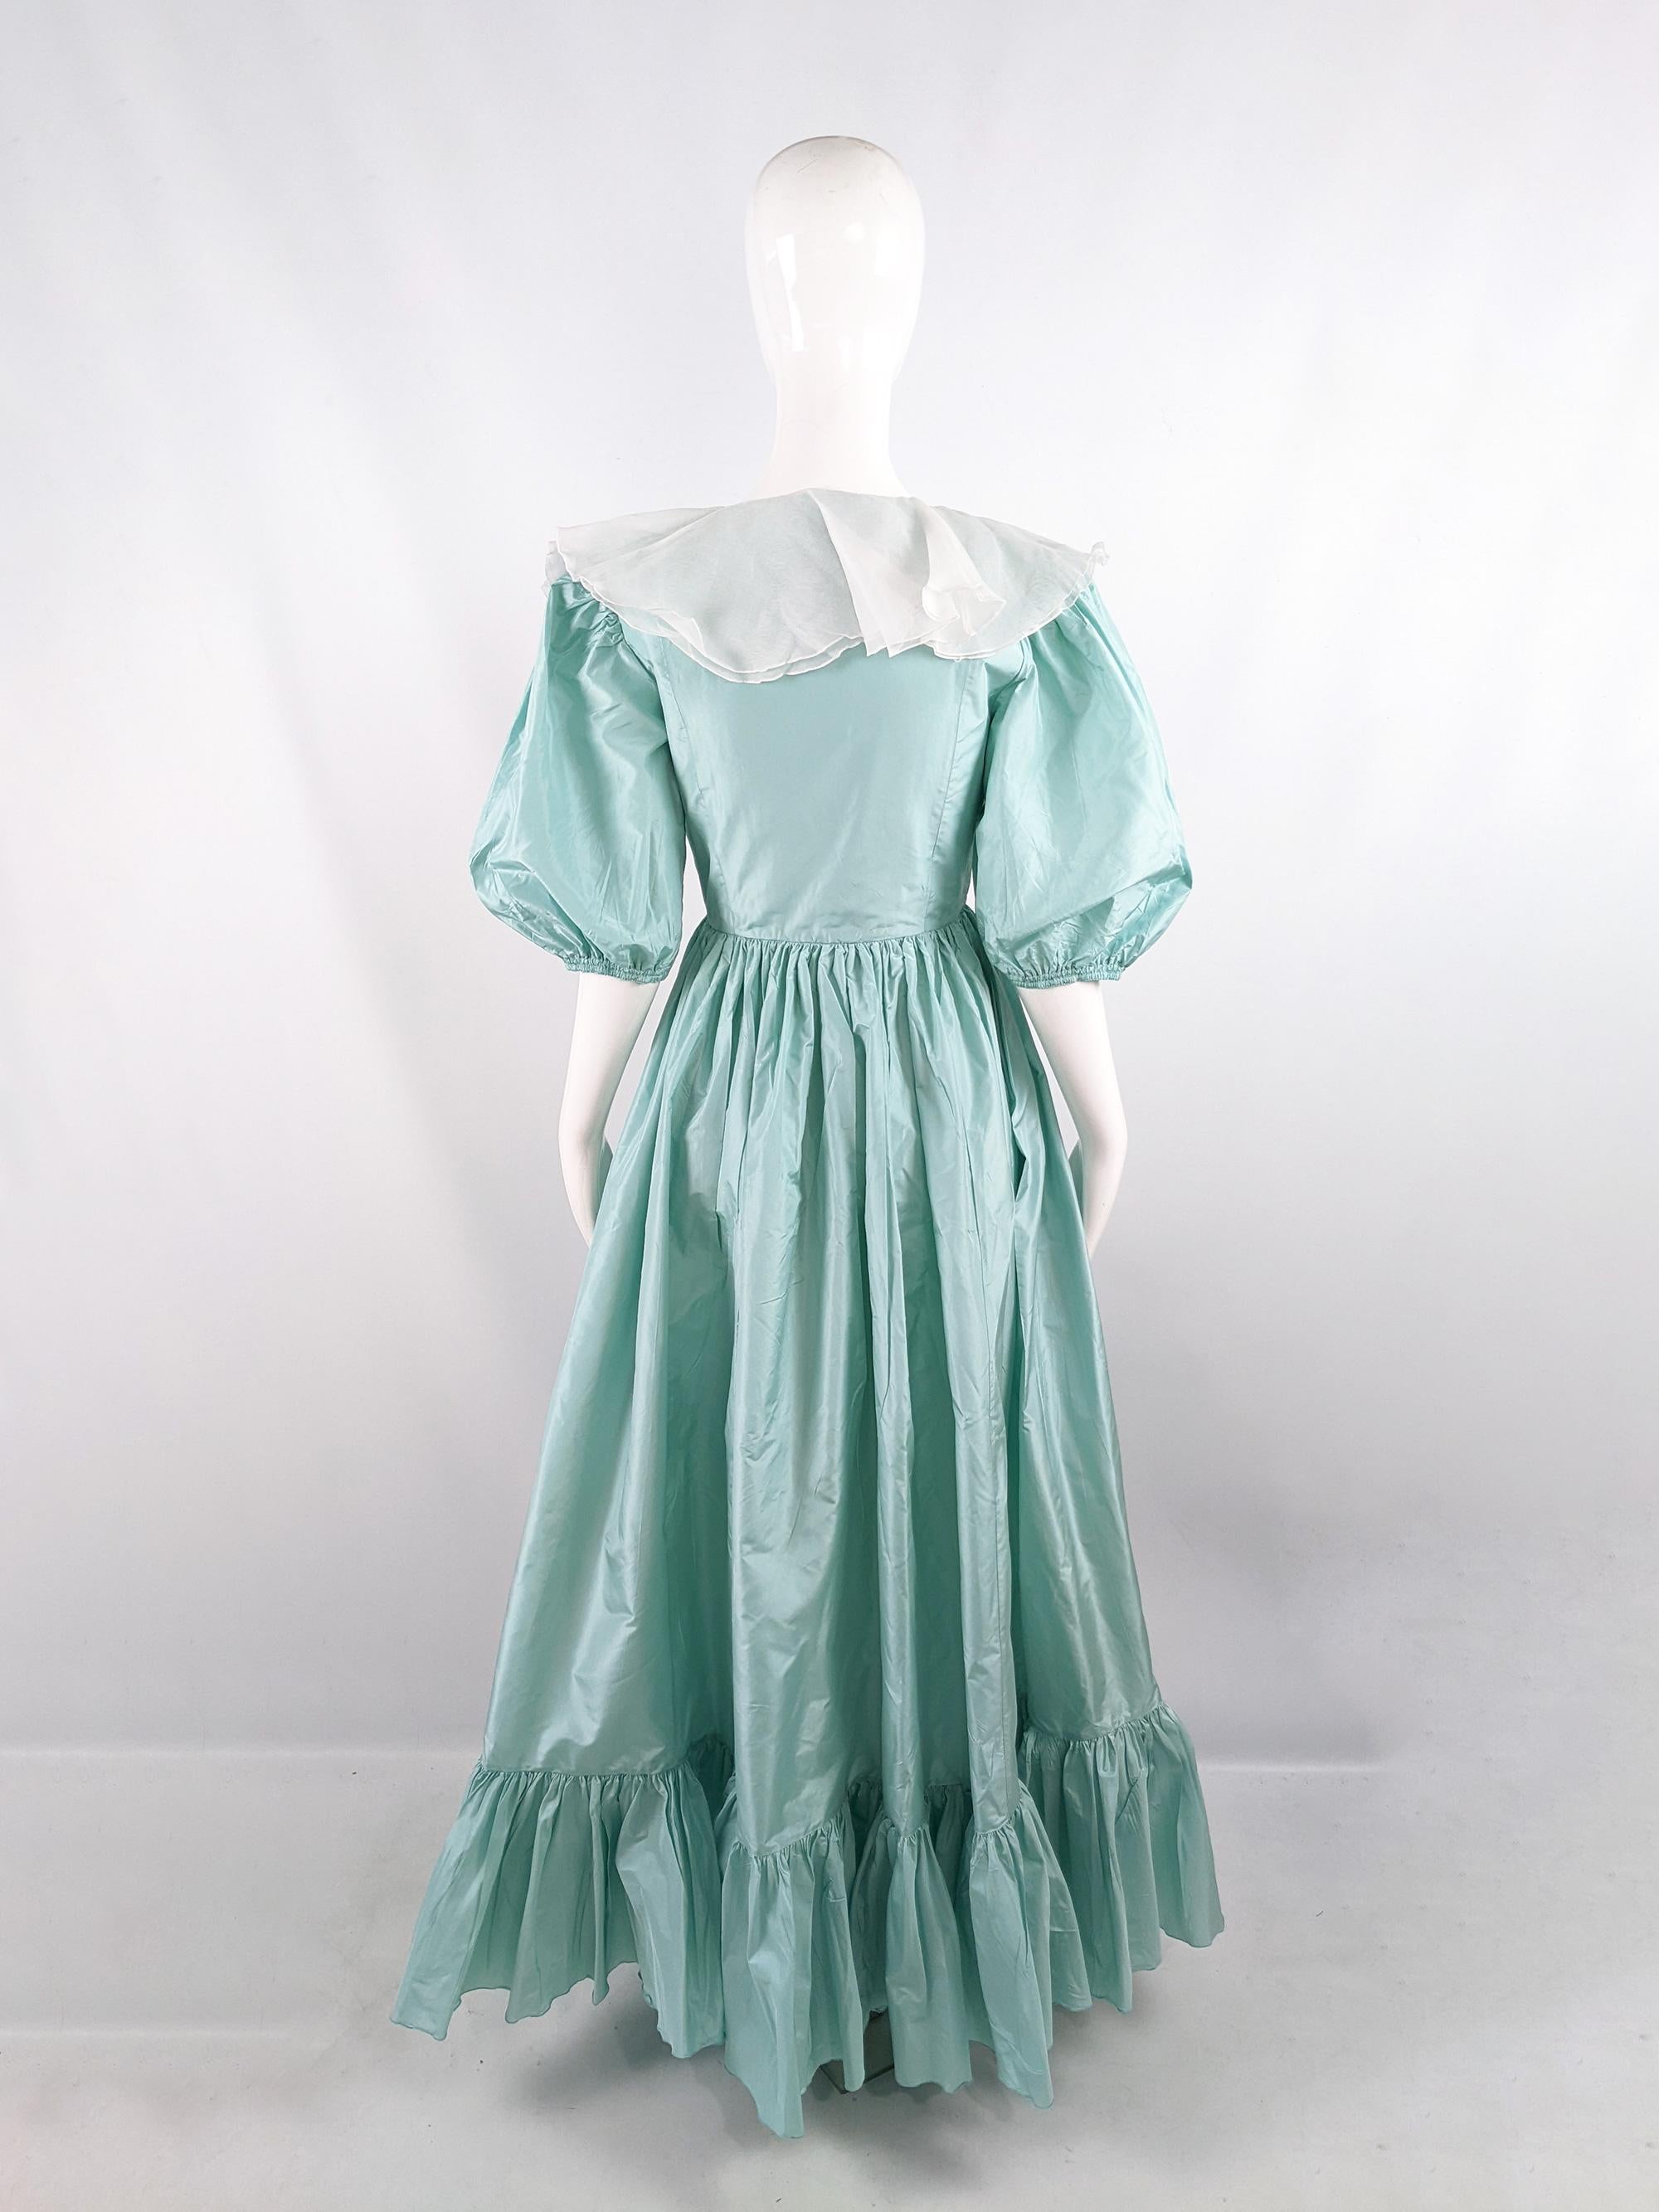 Chelsea Design Co Vintage 80s Mint Taffeta Plunge Neck Ball Gown Dress, 1980s In Good Condition For Sale In Doncaster, South Yorkshire